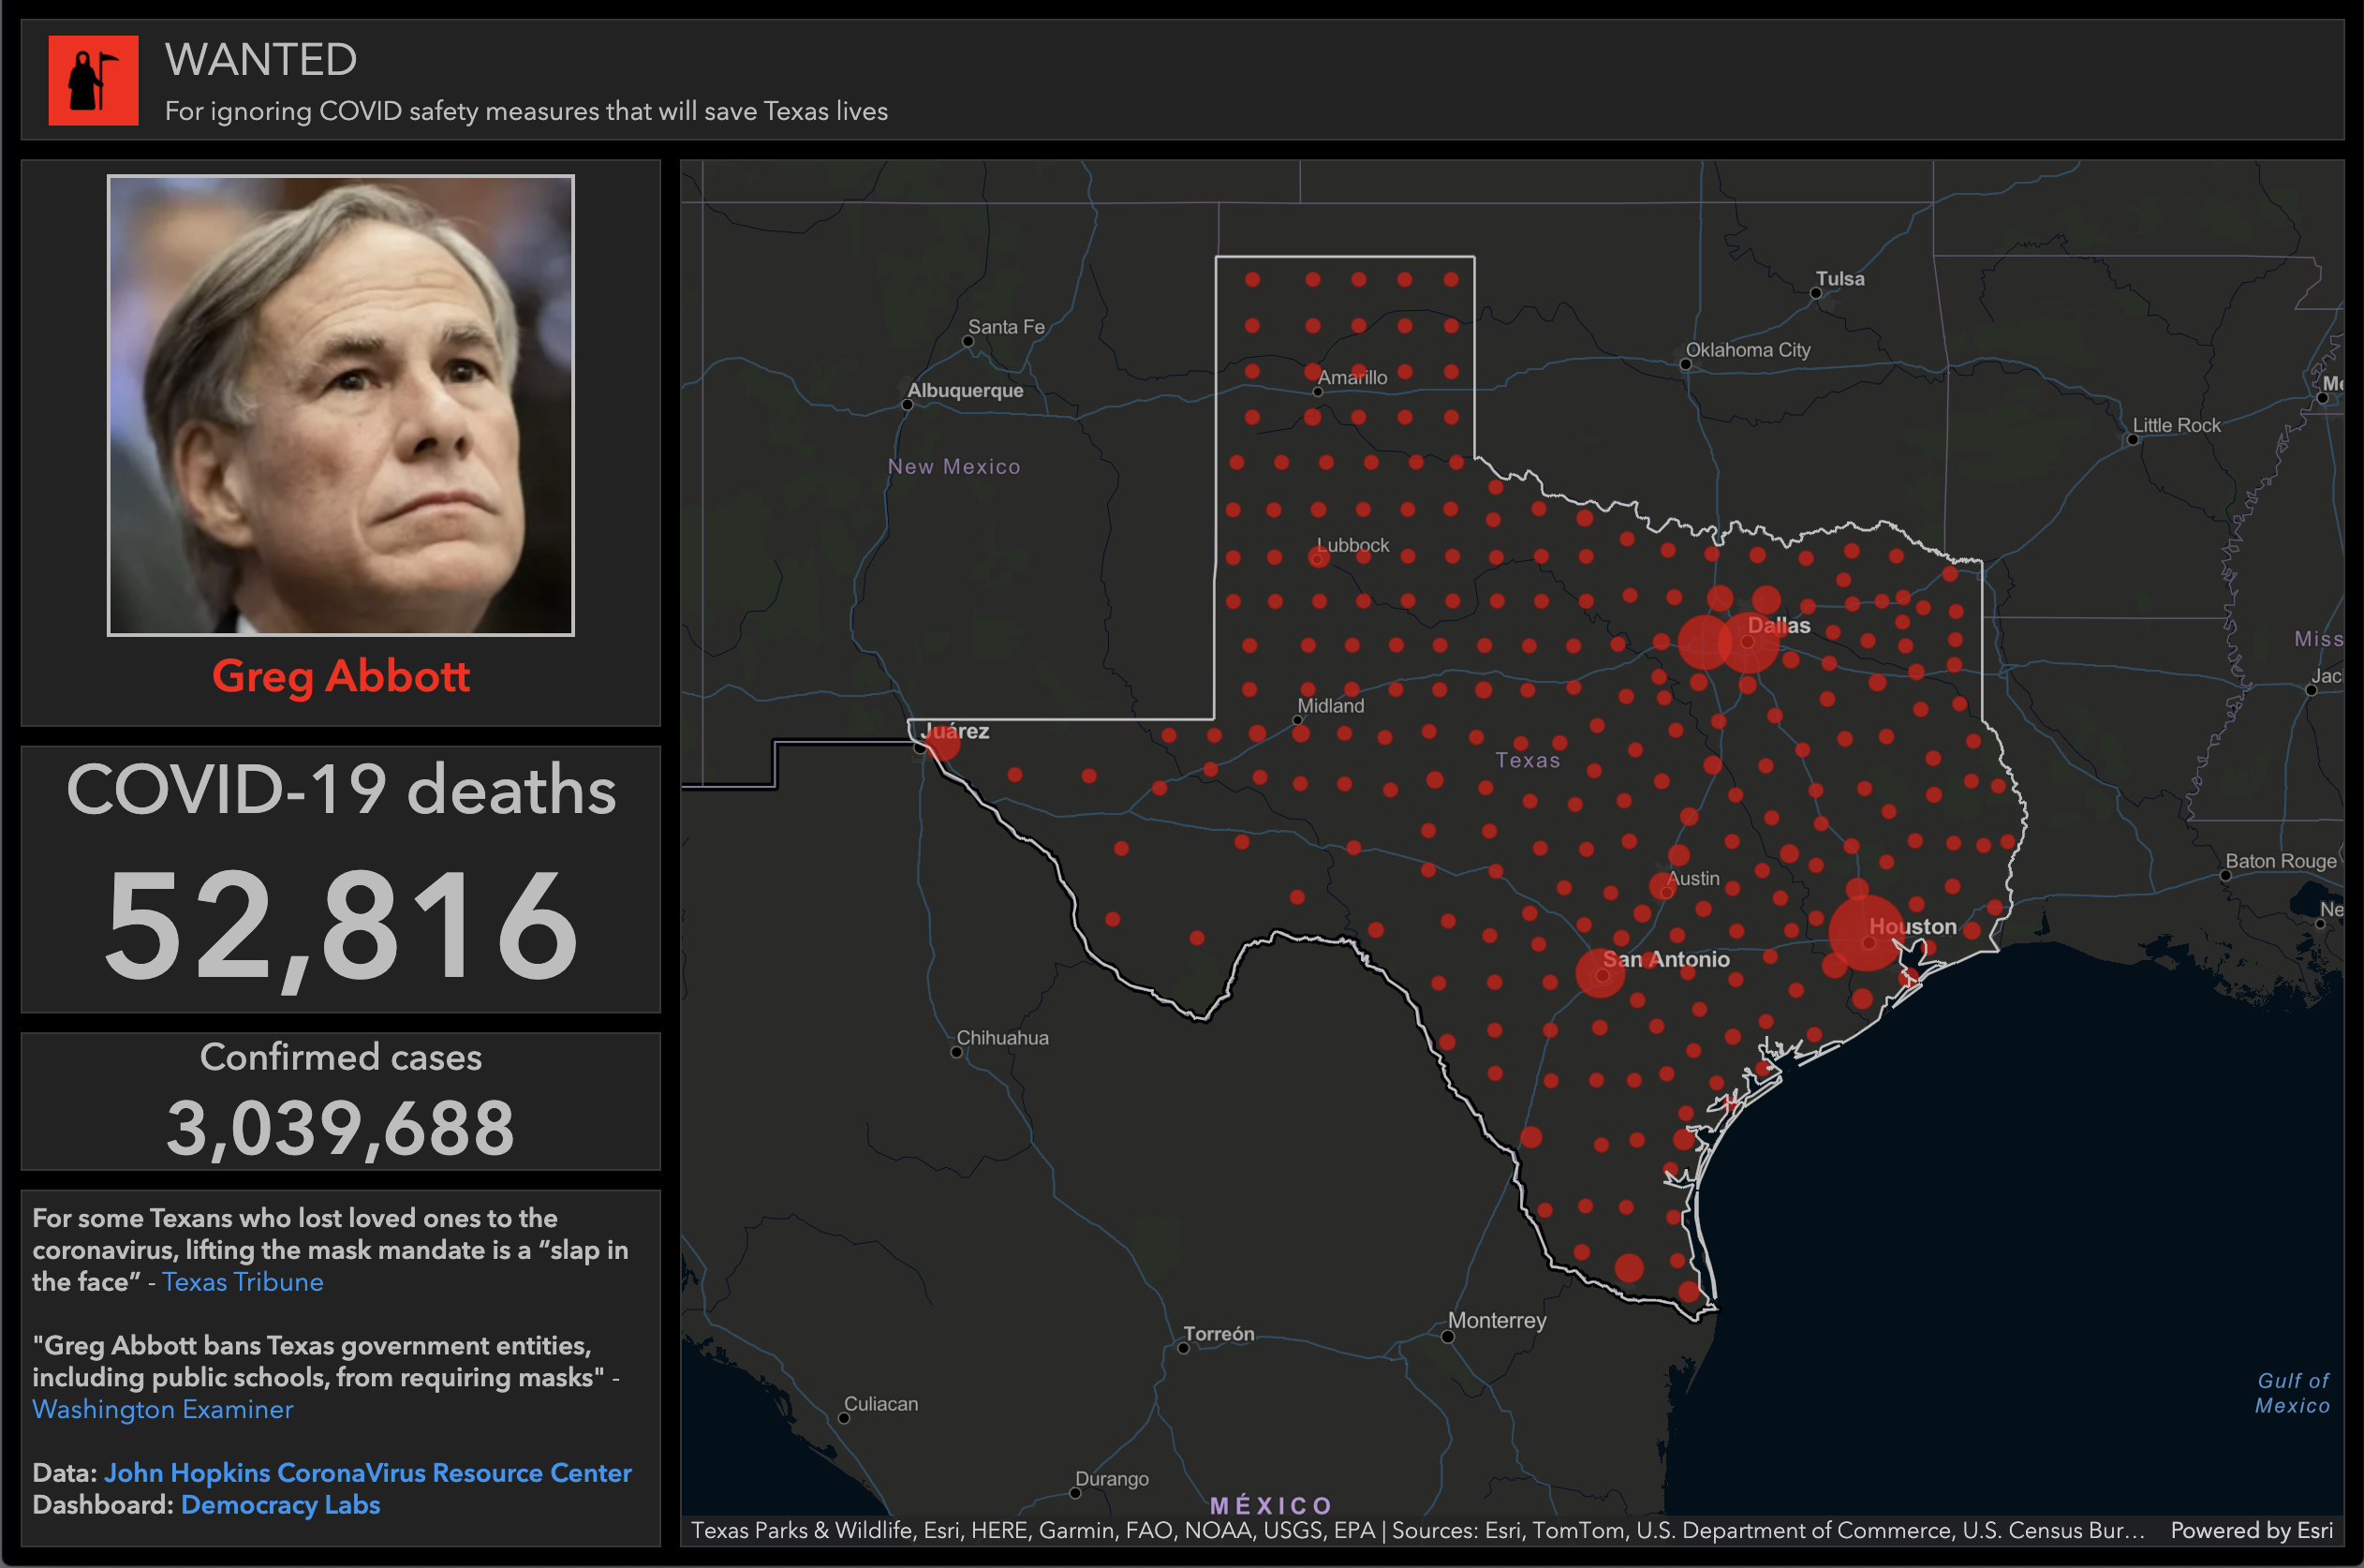 Greg Abbott blocks COVID-19 safety precautions as the pandemic rages in Texas